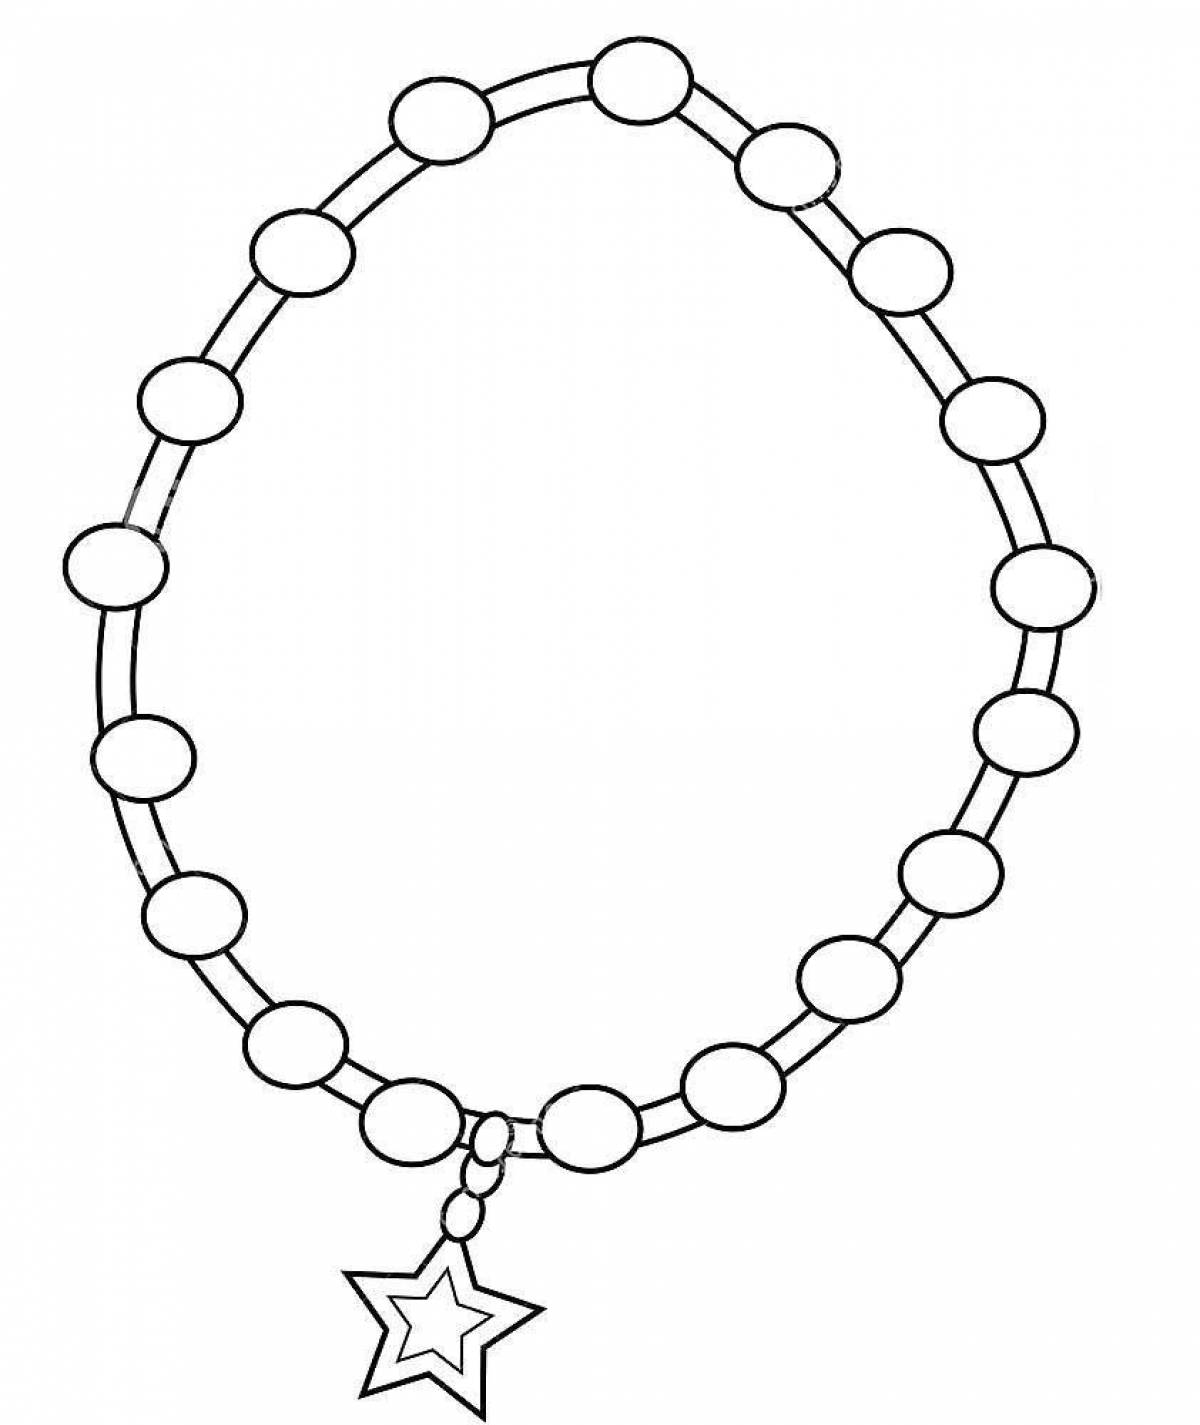 Shimmery beads coloring page